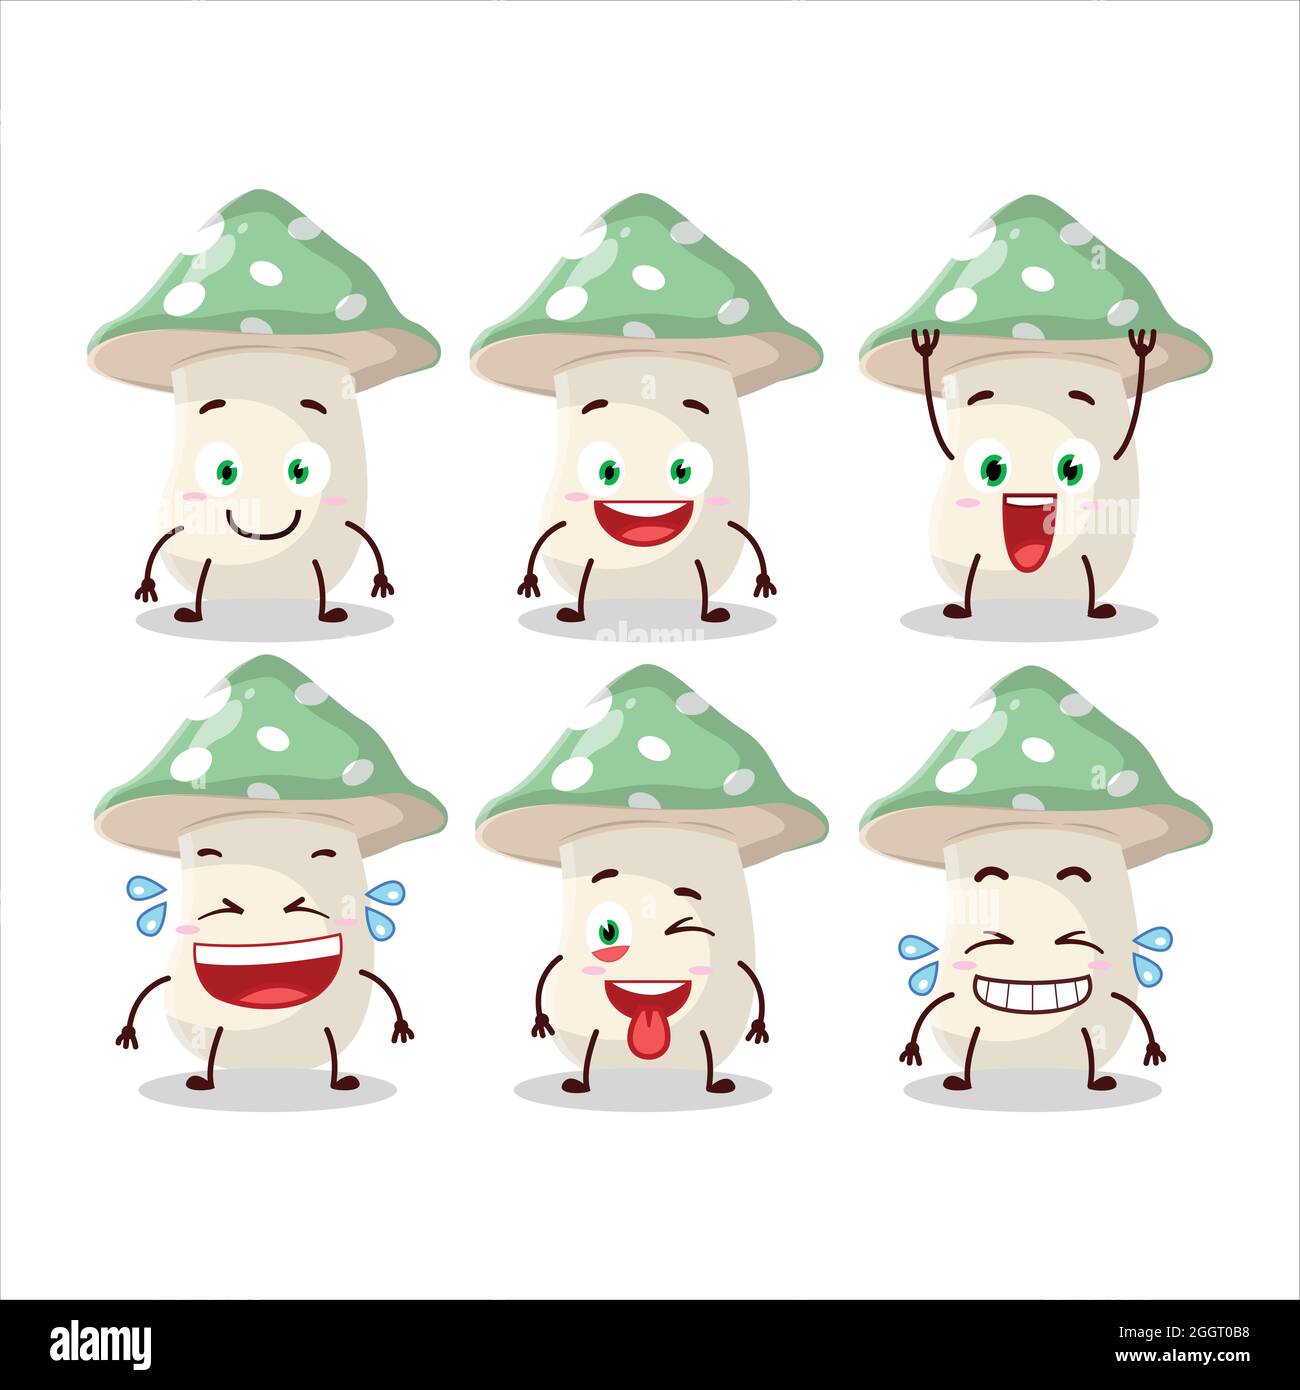 Cartoon character of green amanita with smile expression. Vector illustration Stock Vector